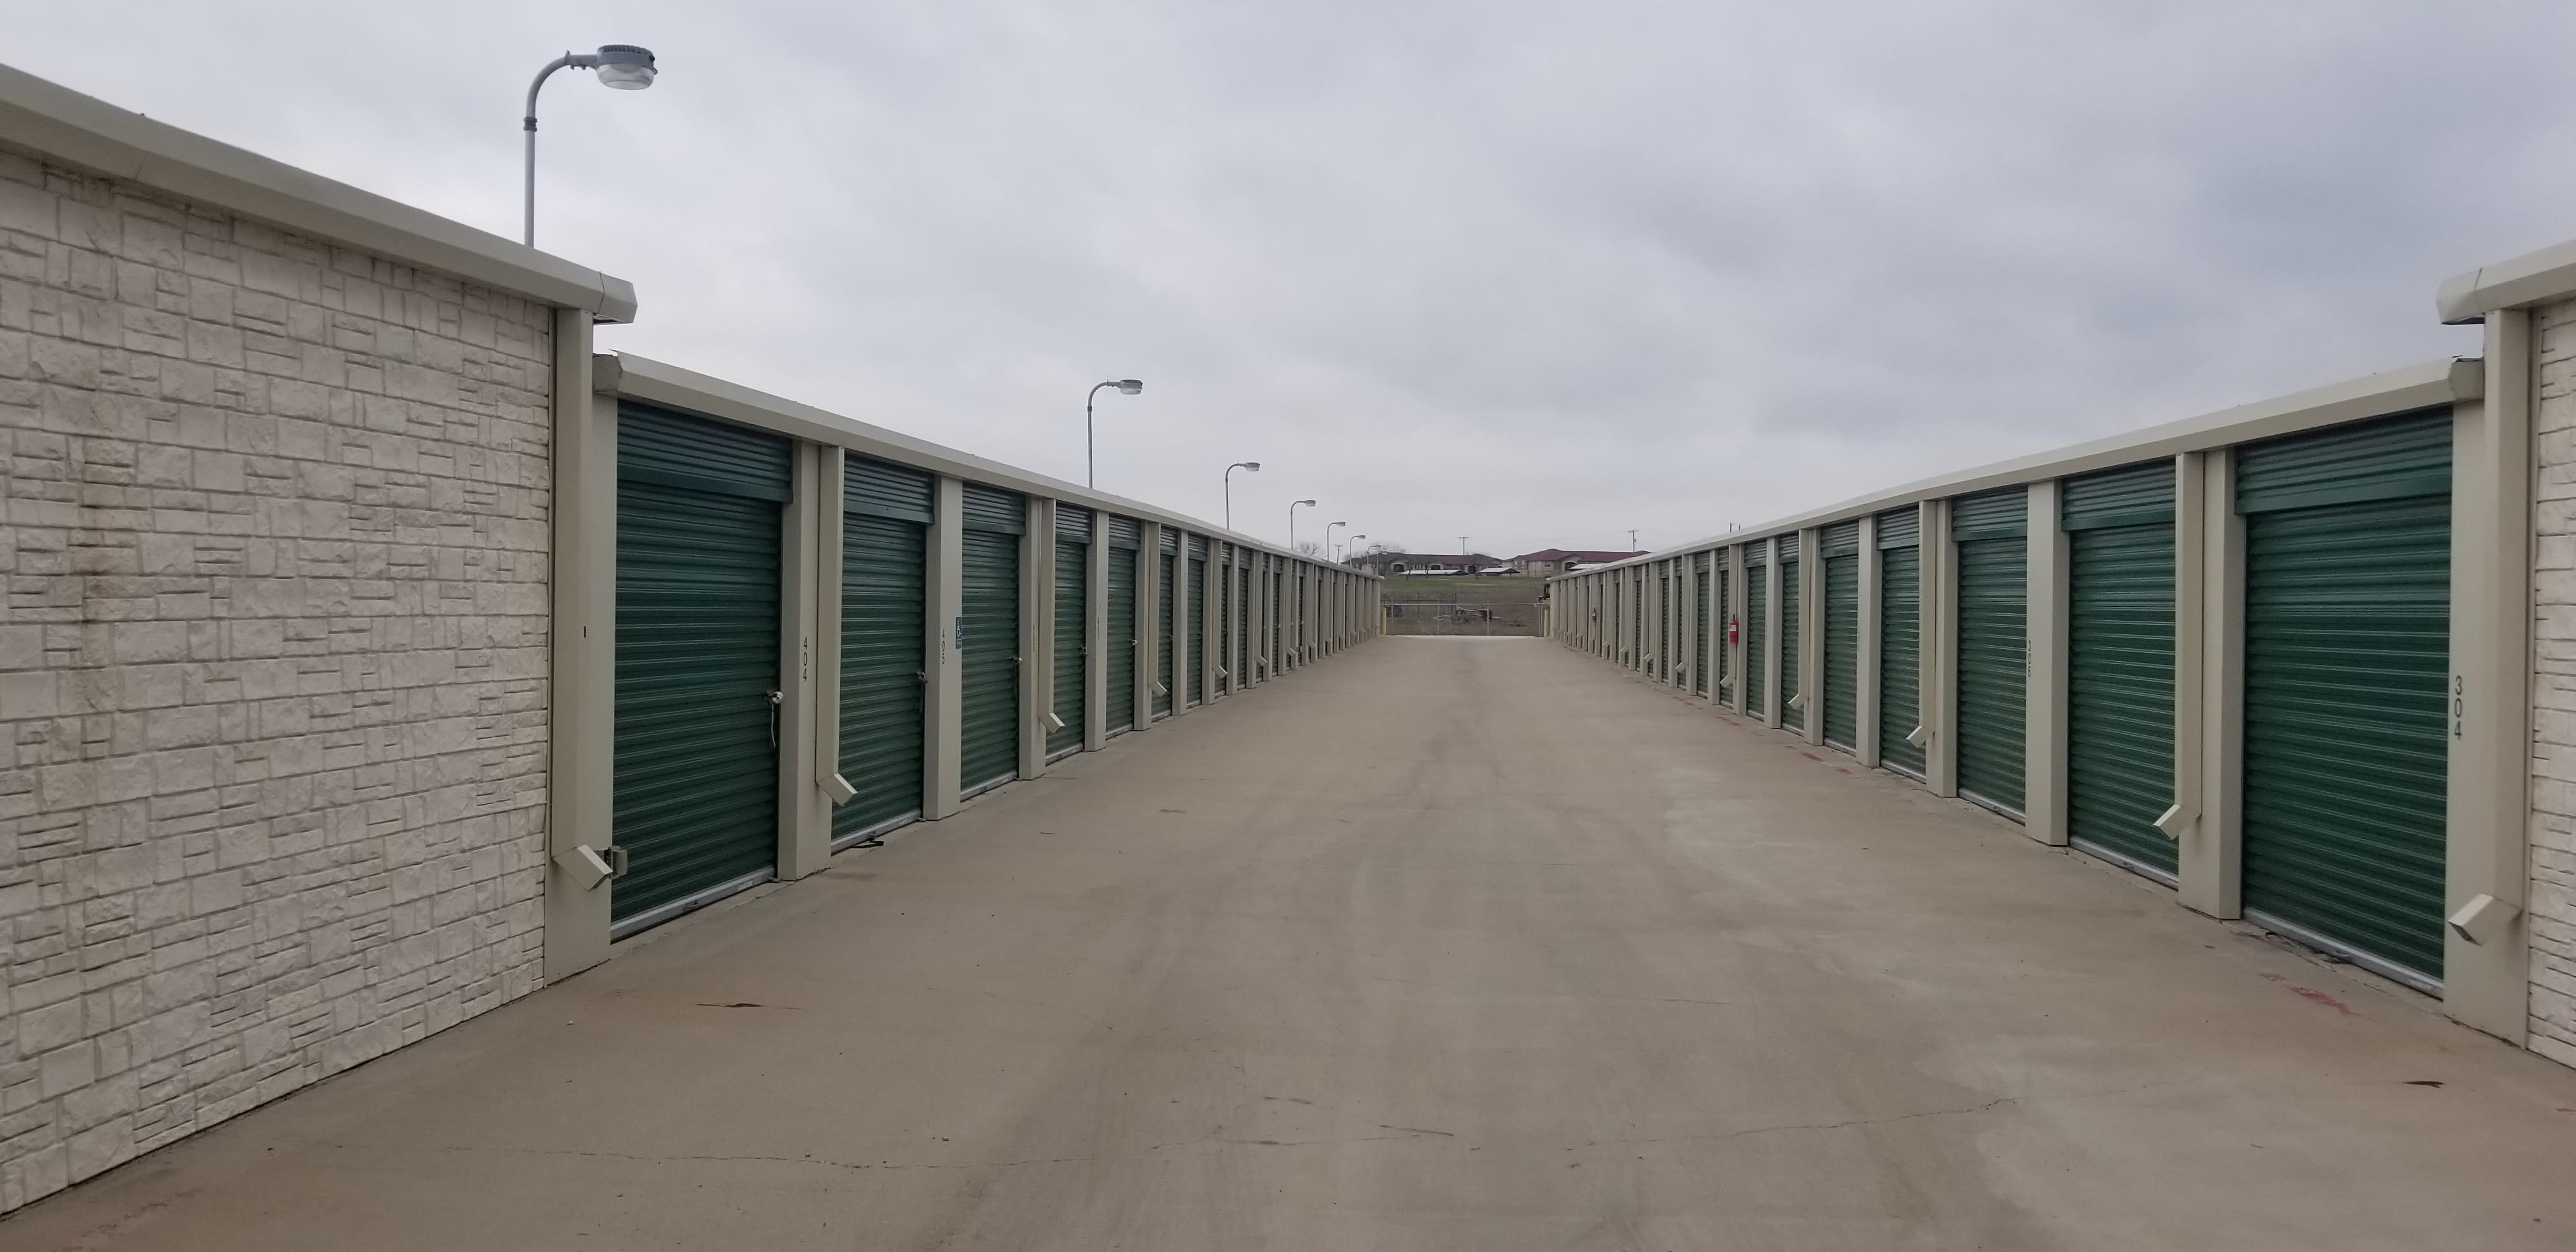 View our features at KO Storage in Cleburne, Texas